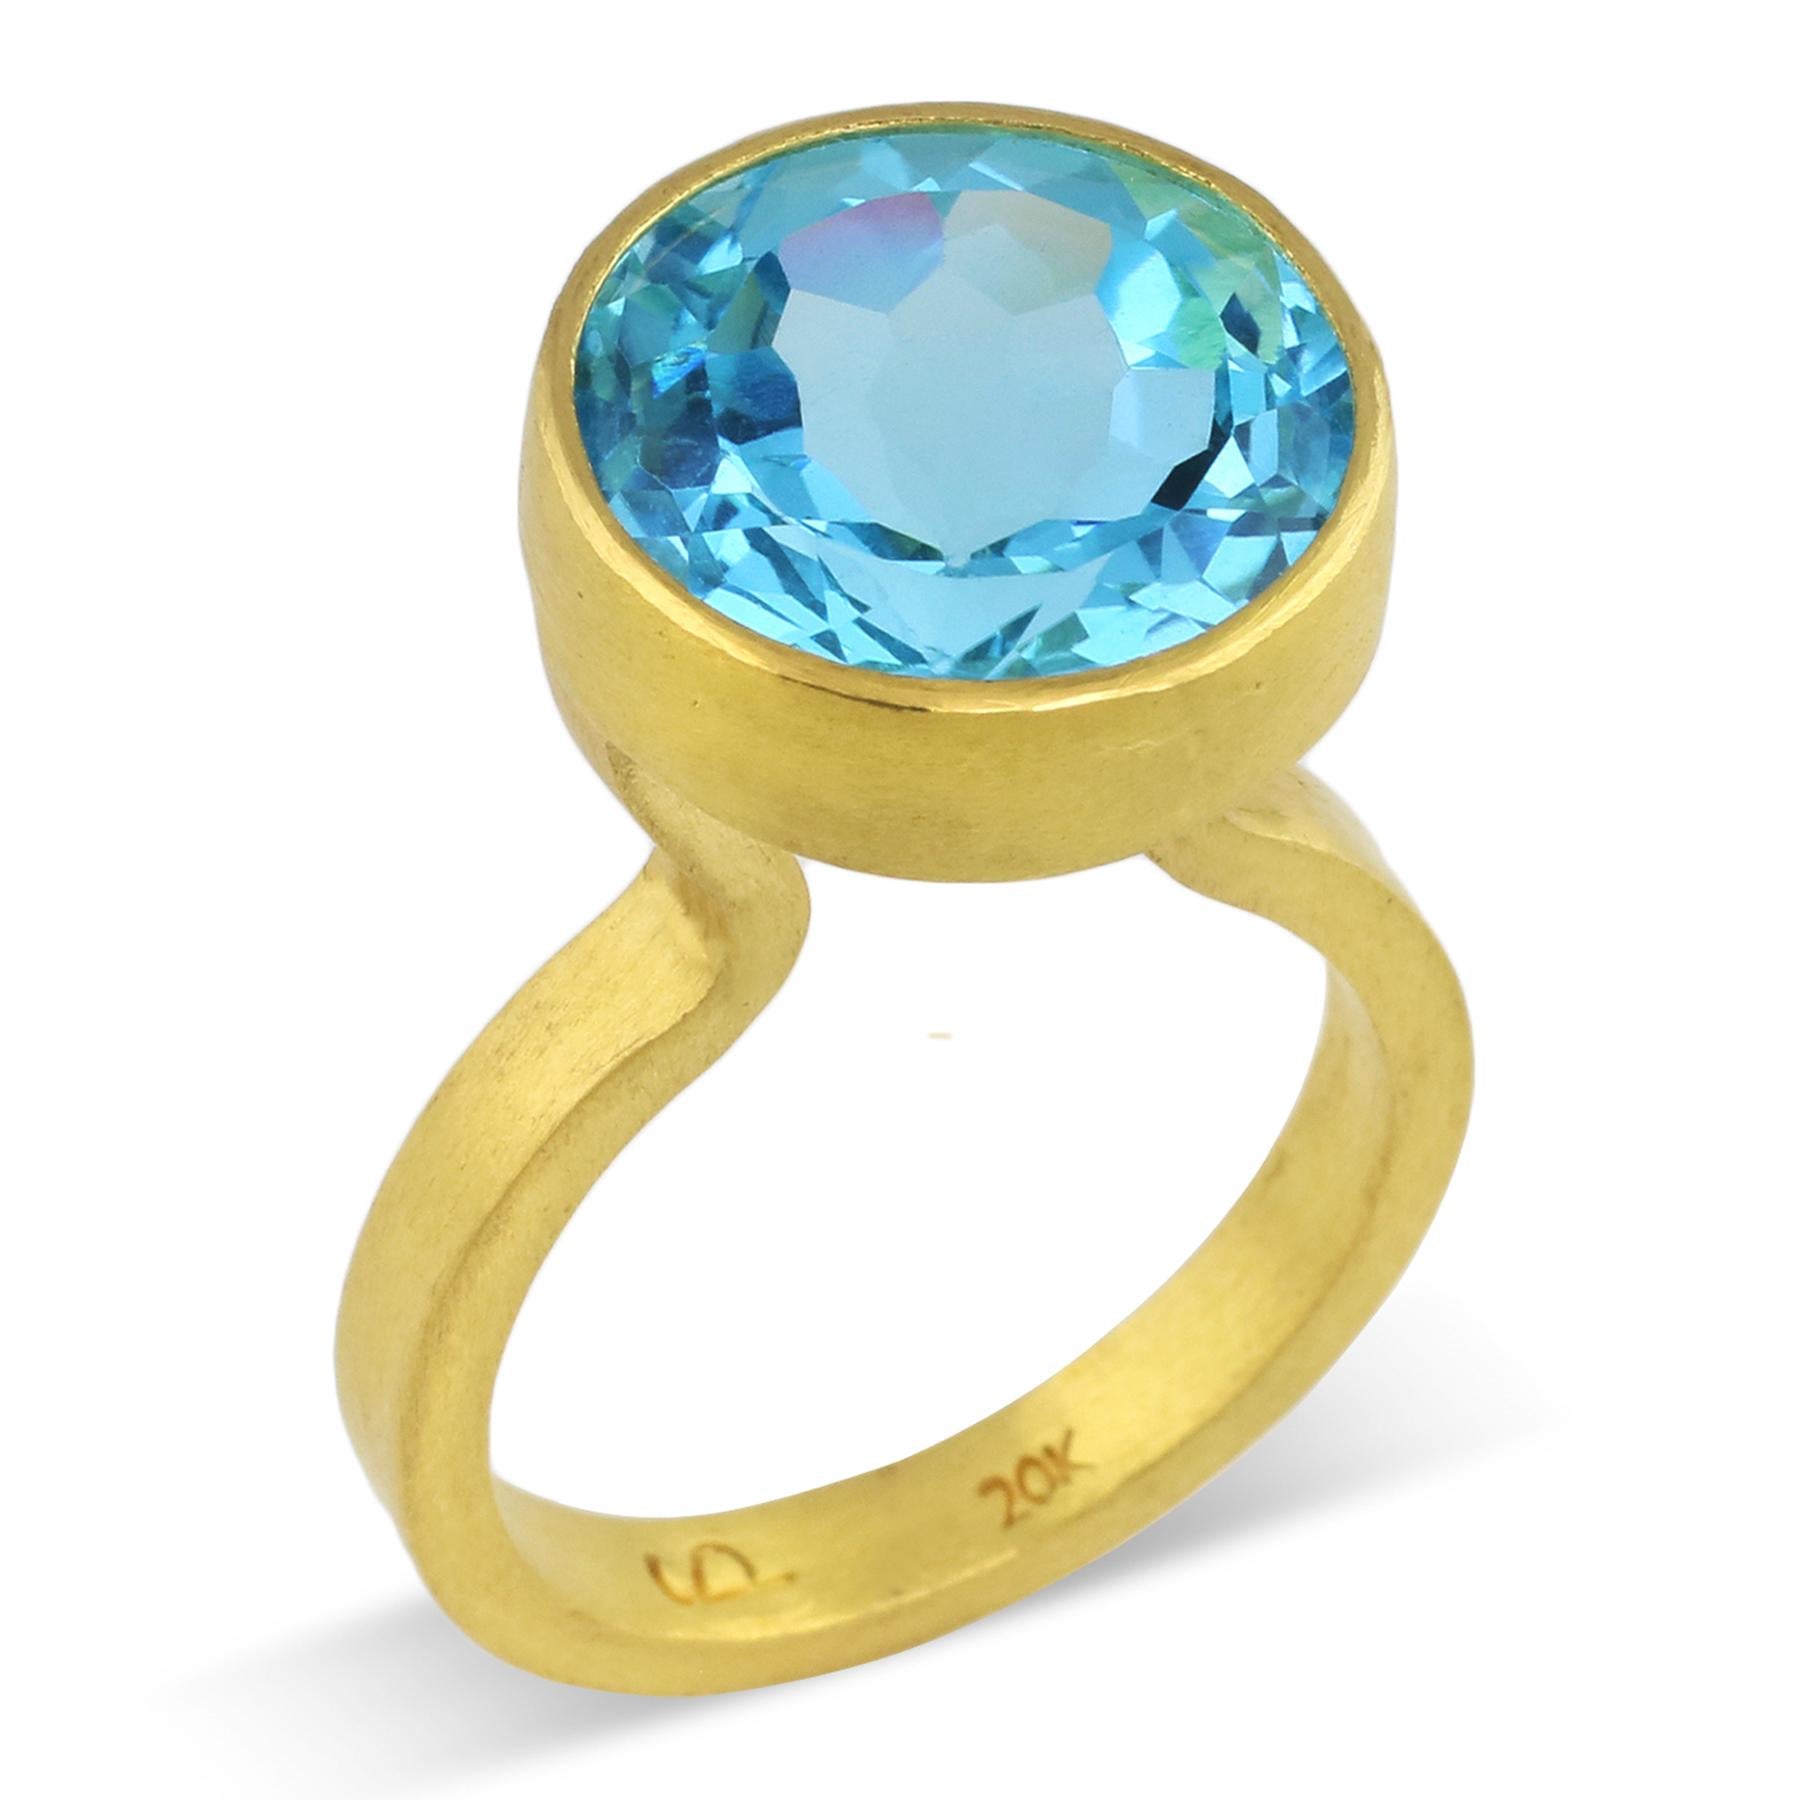 Artisan PHILIPPE SPENCER 11.05 Ct. Blue Topaz in 22K and 20K Gold Statement Ring For Sale